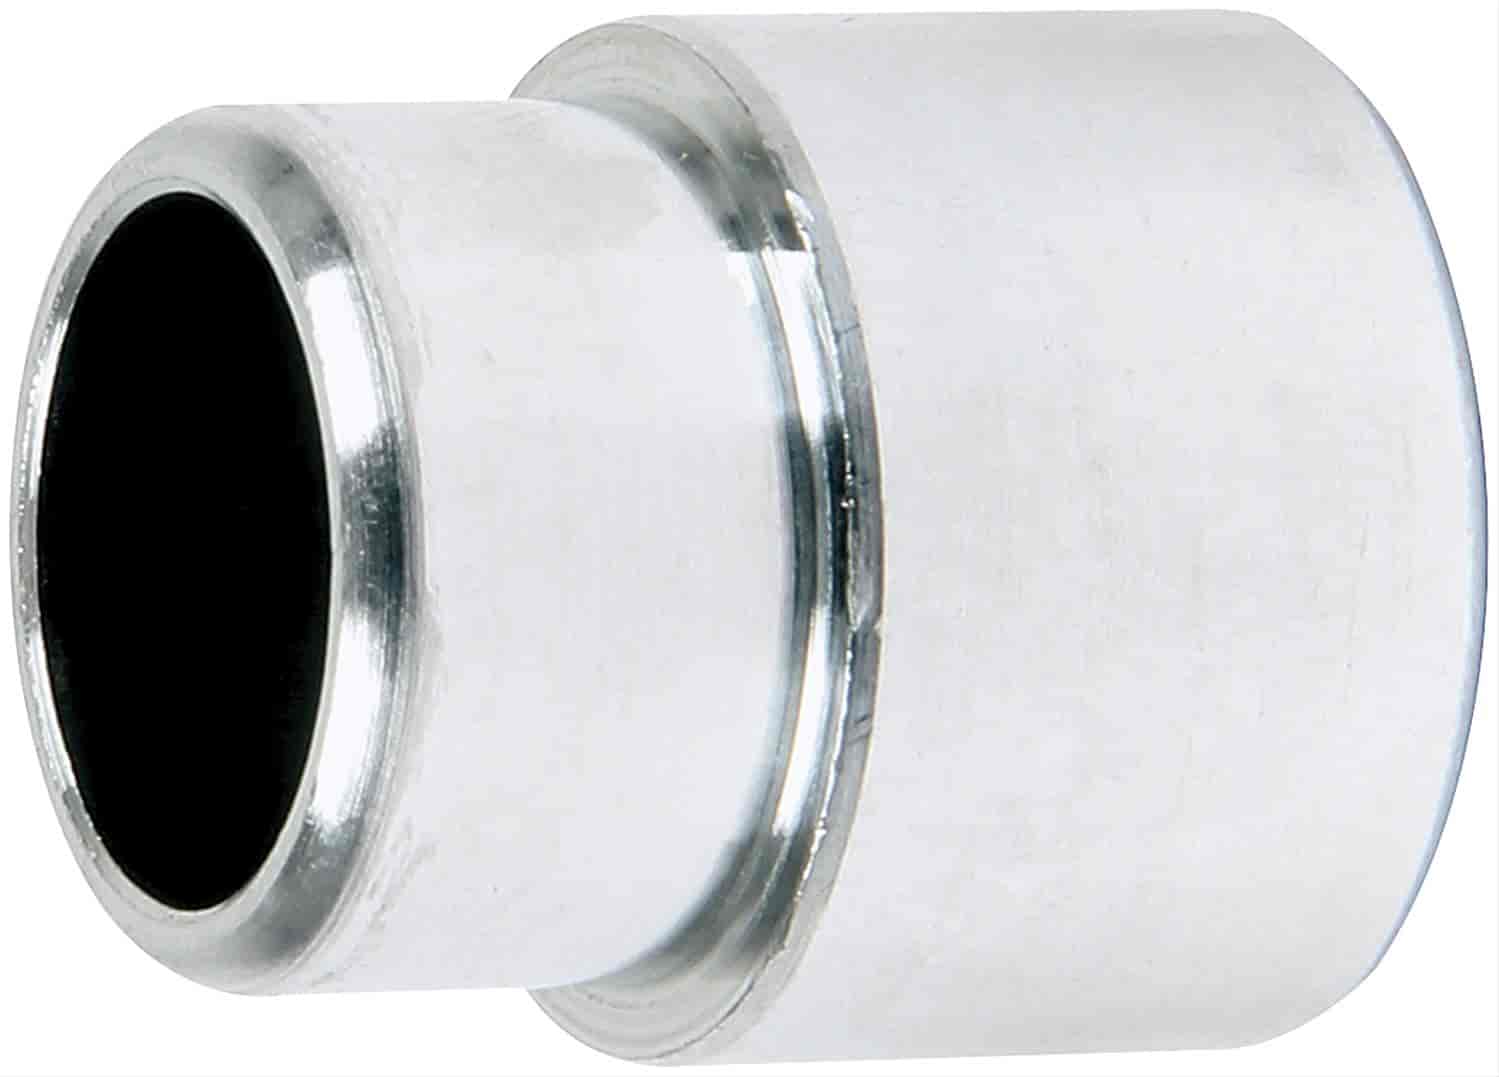 Rod End Reducer Spacers 1/2" Length